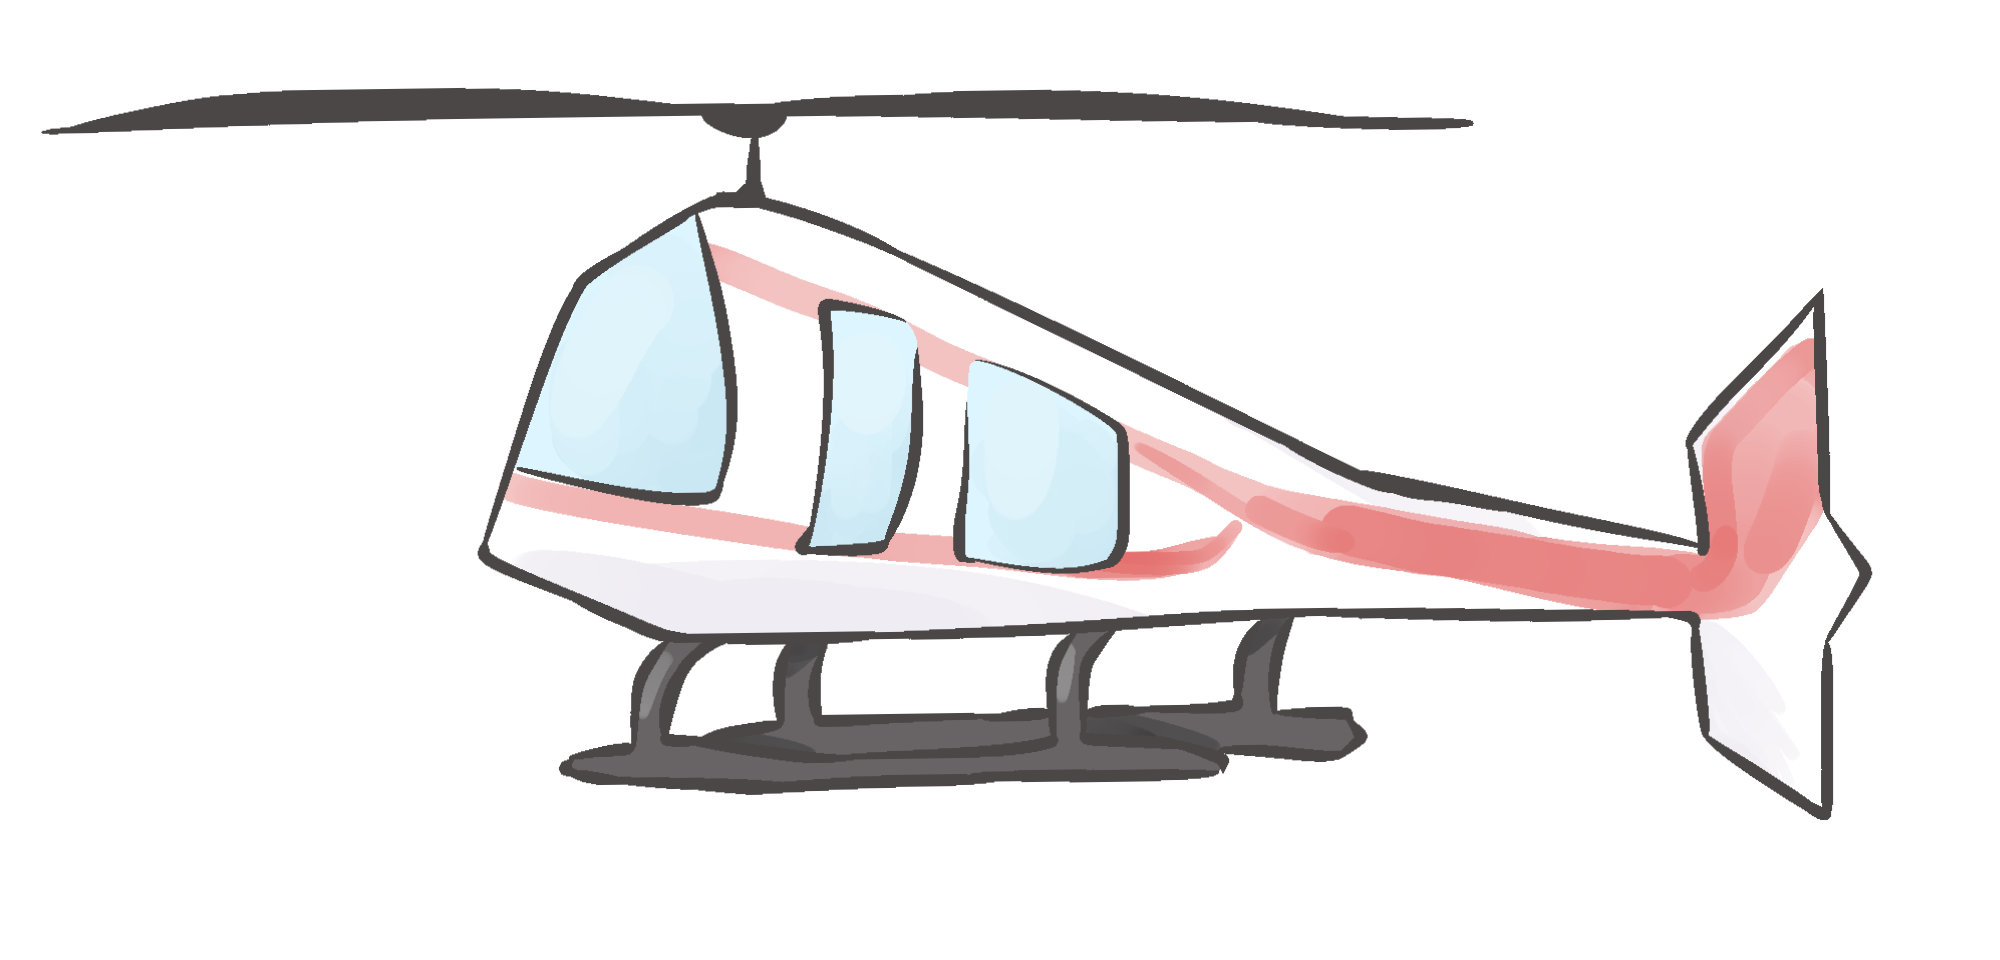 helicopter clipart cobra helicopter